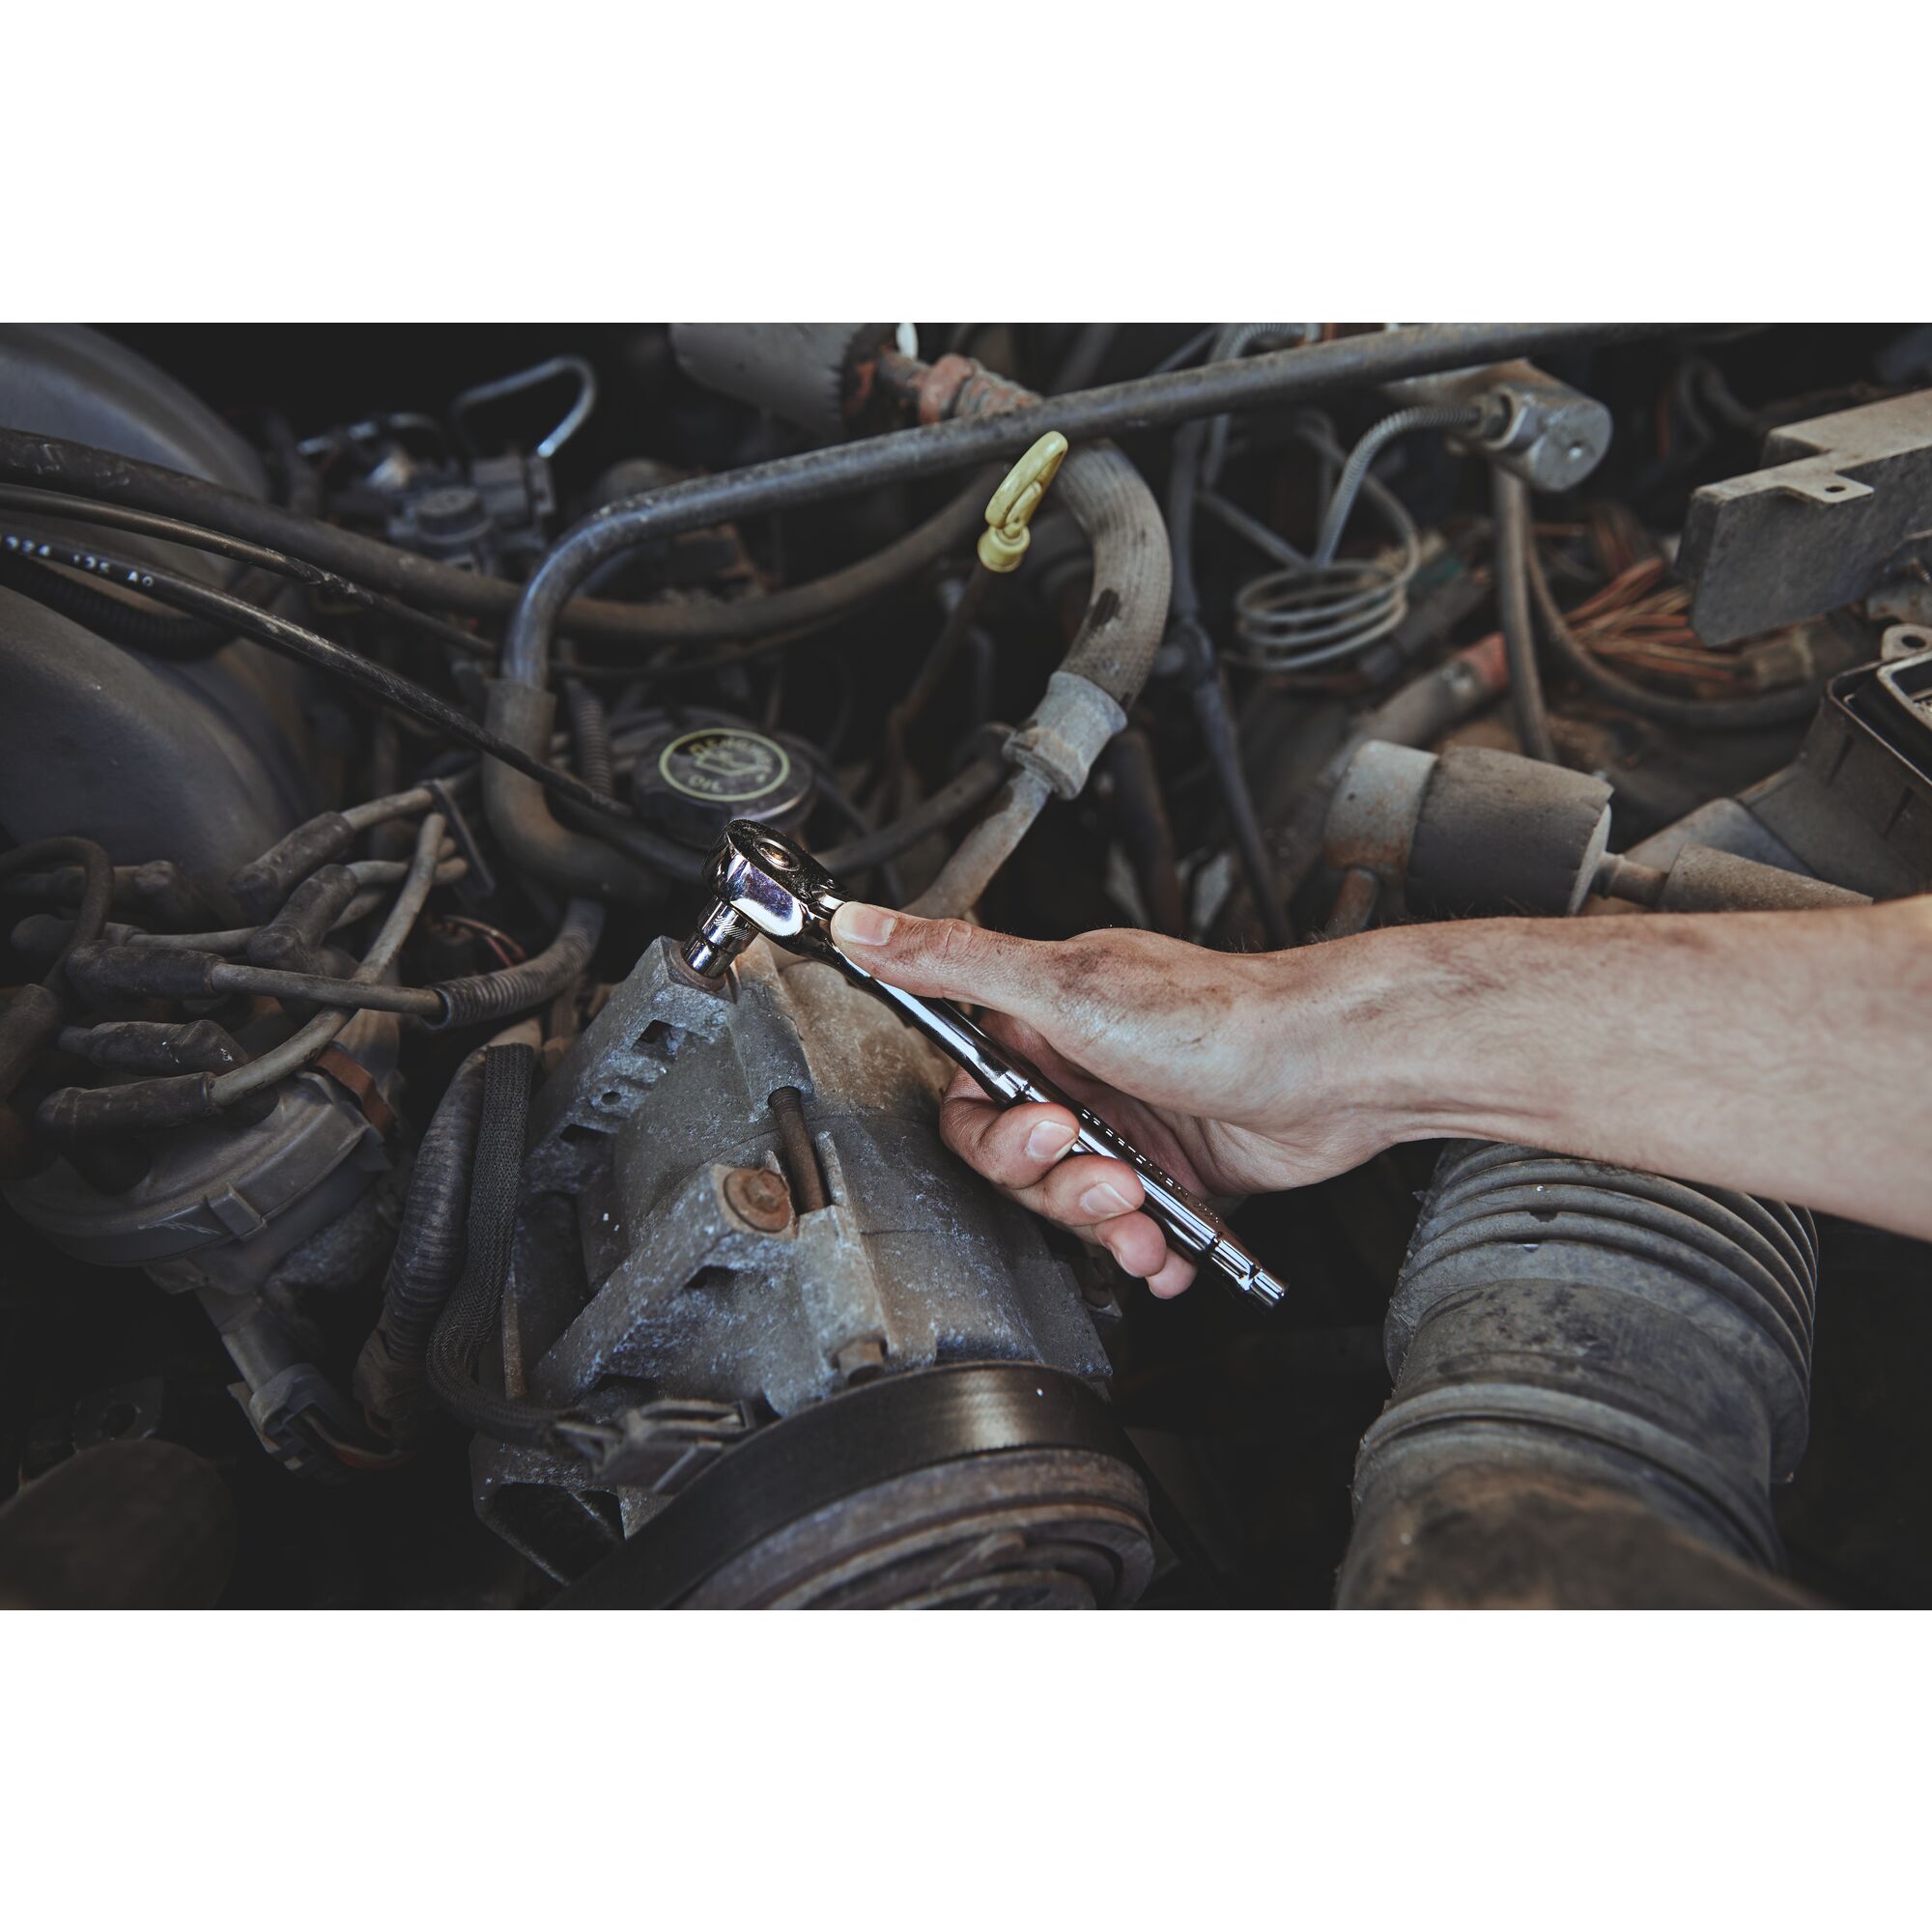 Packed With Performance, Backed by Full Lifetime Warranty: CRAFTSMAN®  Introduces OVERDRIVE™ Mechanics Tool Sets